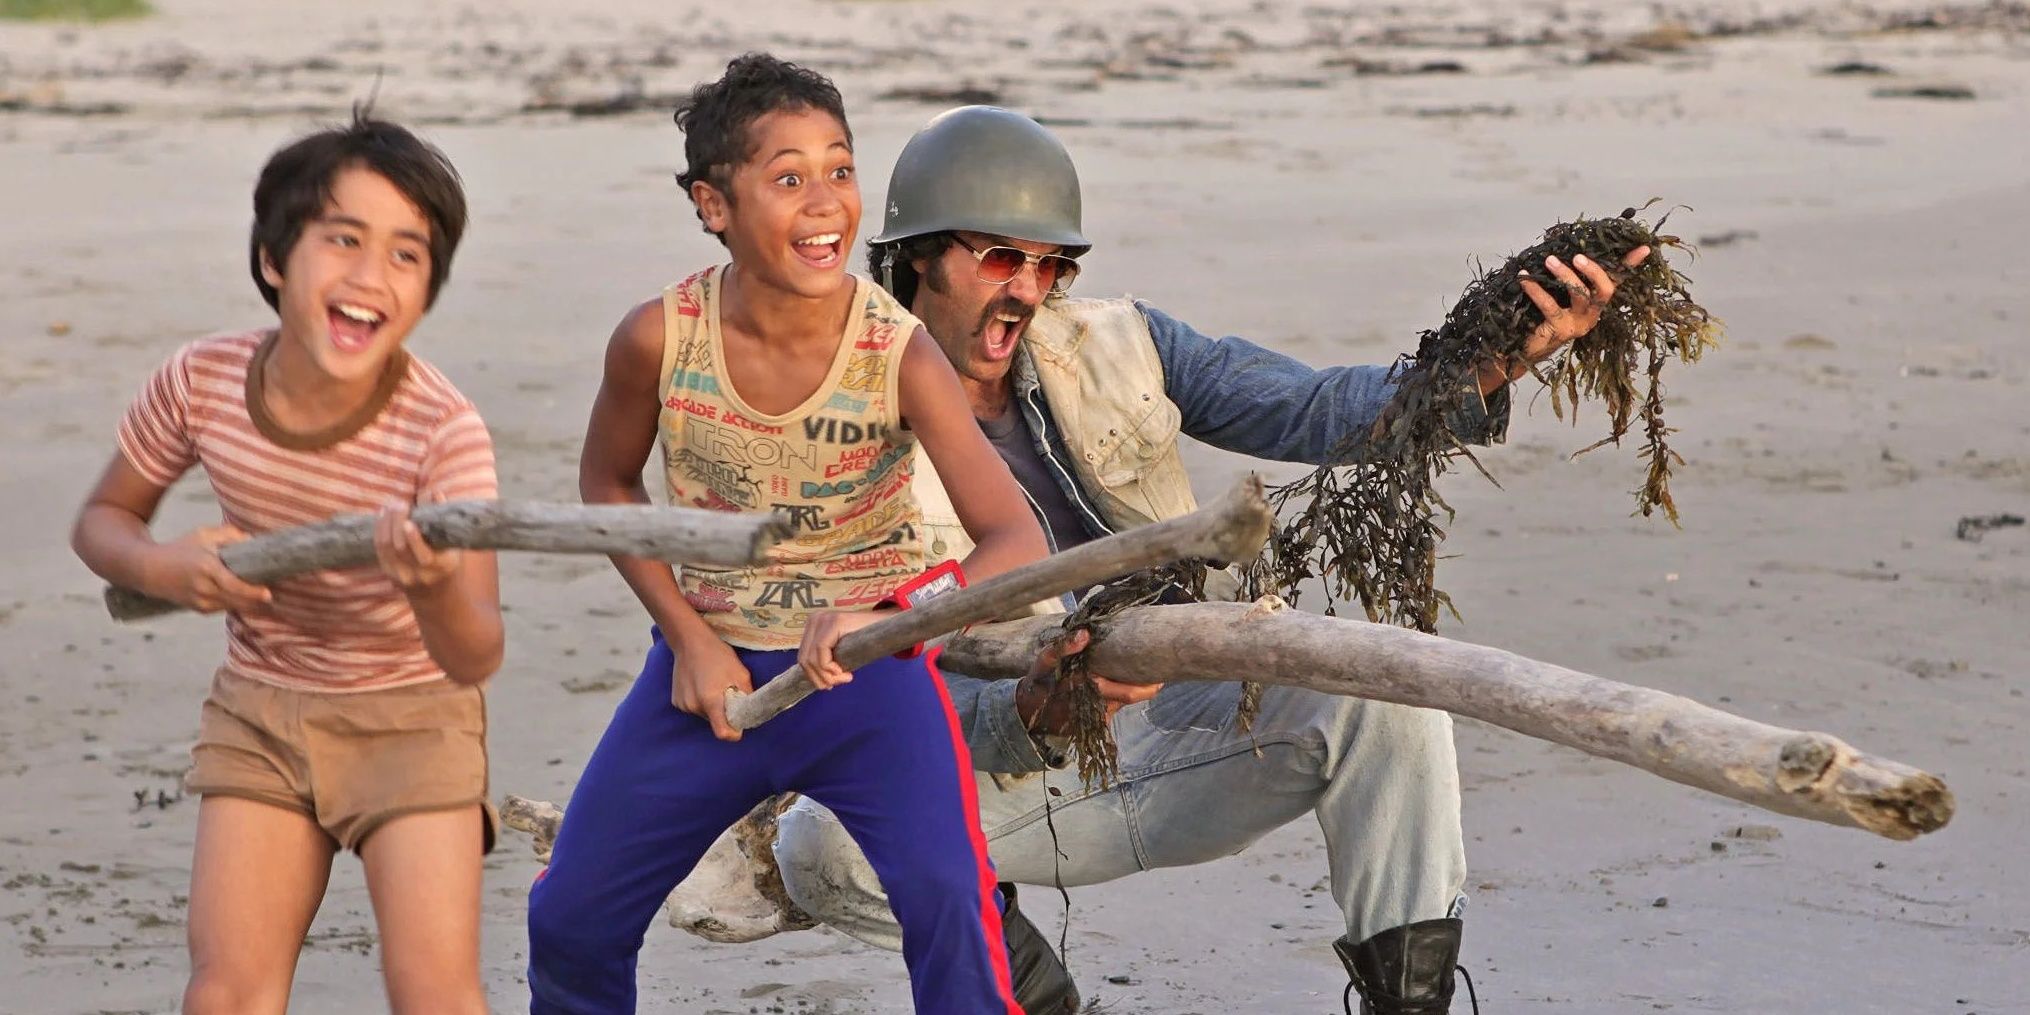 The characters Rocky, Boy, and Alamein from the film 'Boy' stand on a beach with driftwood.